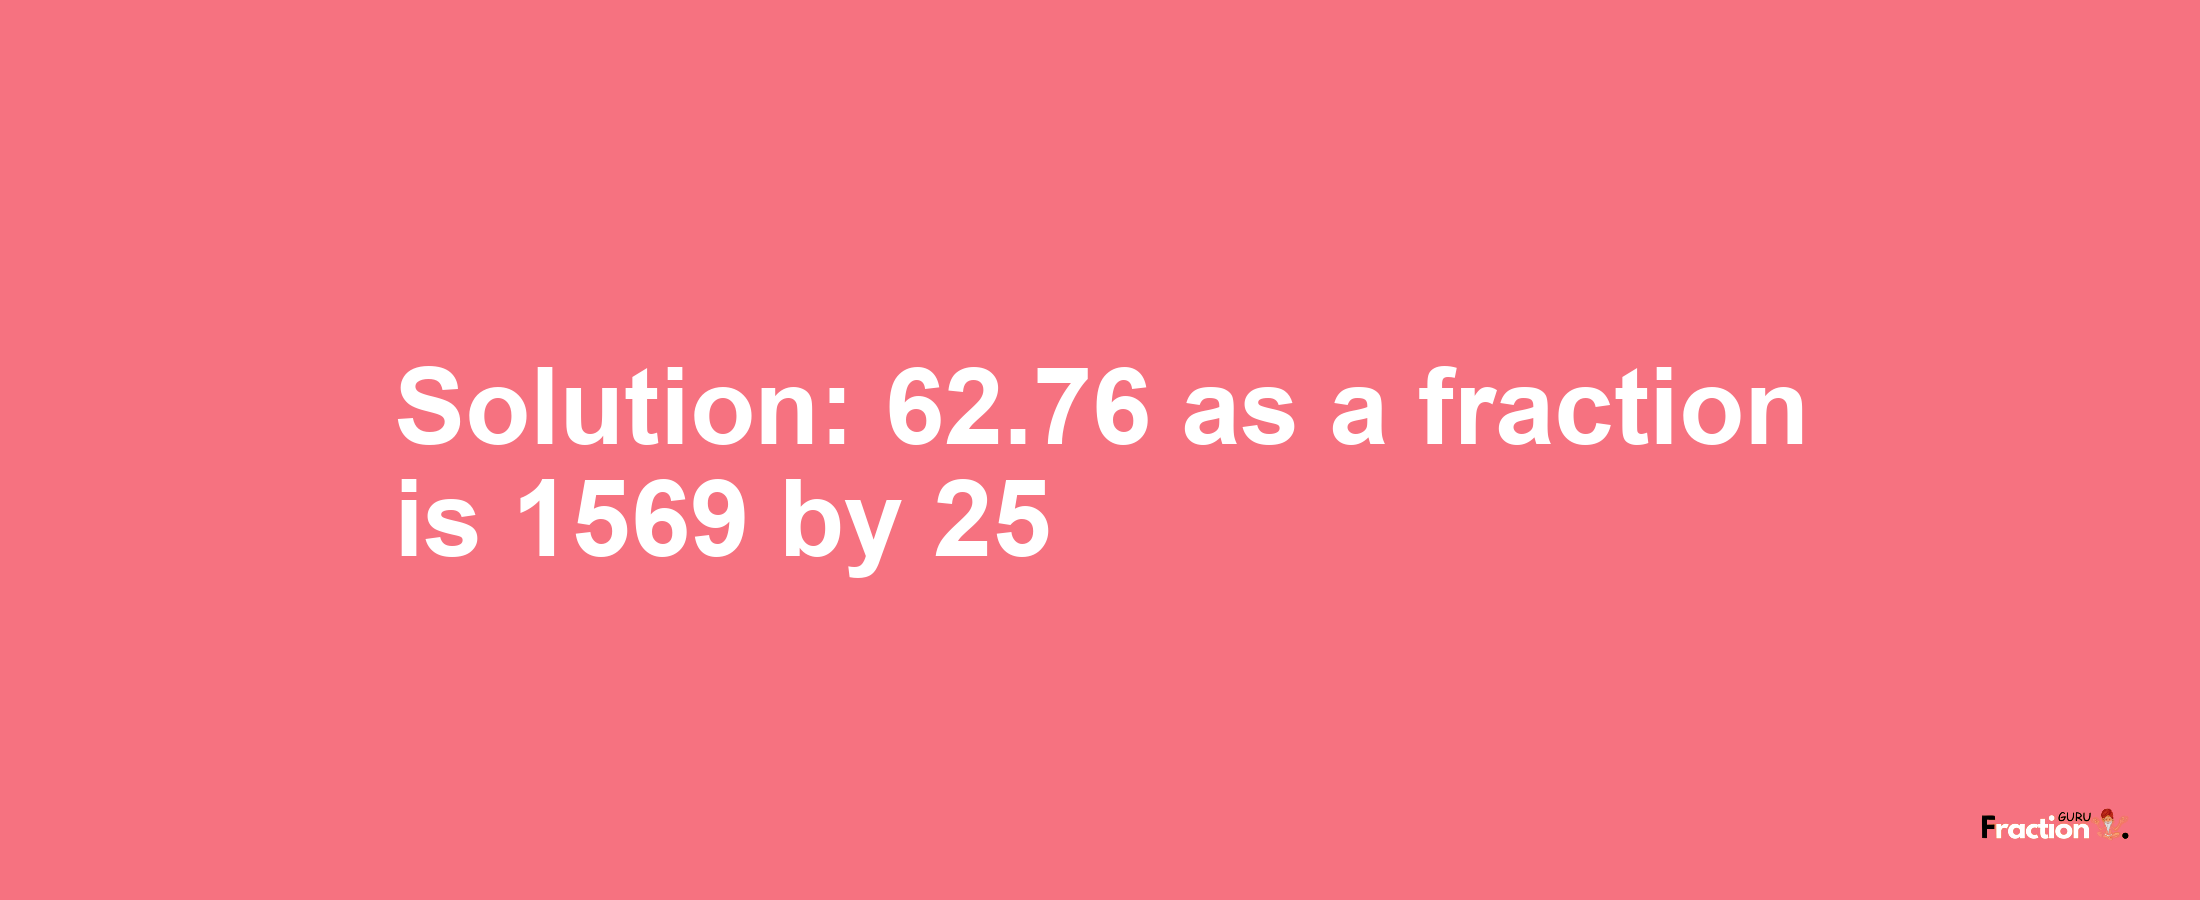 Solution:62.76 as a fraction is 1569/25